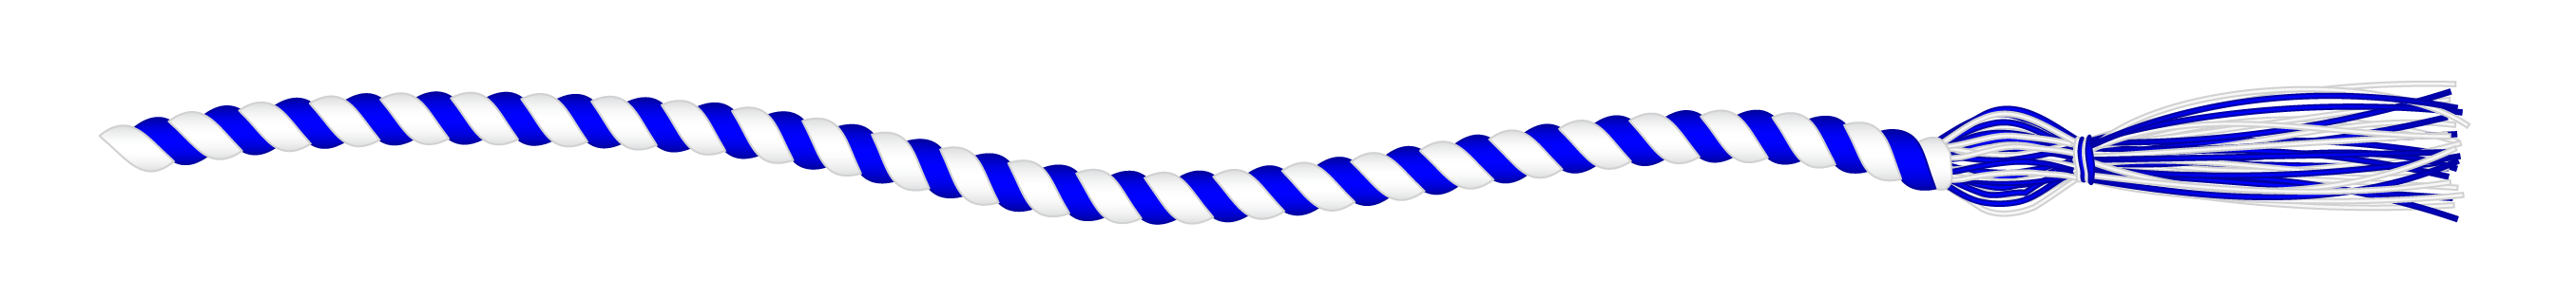 Blue and white cord